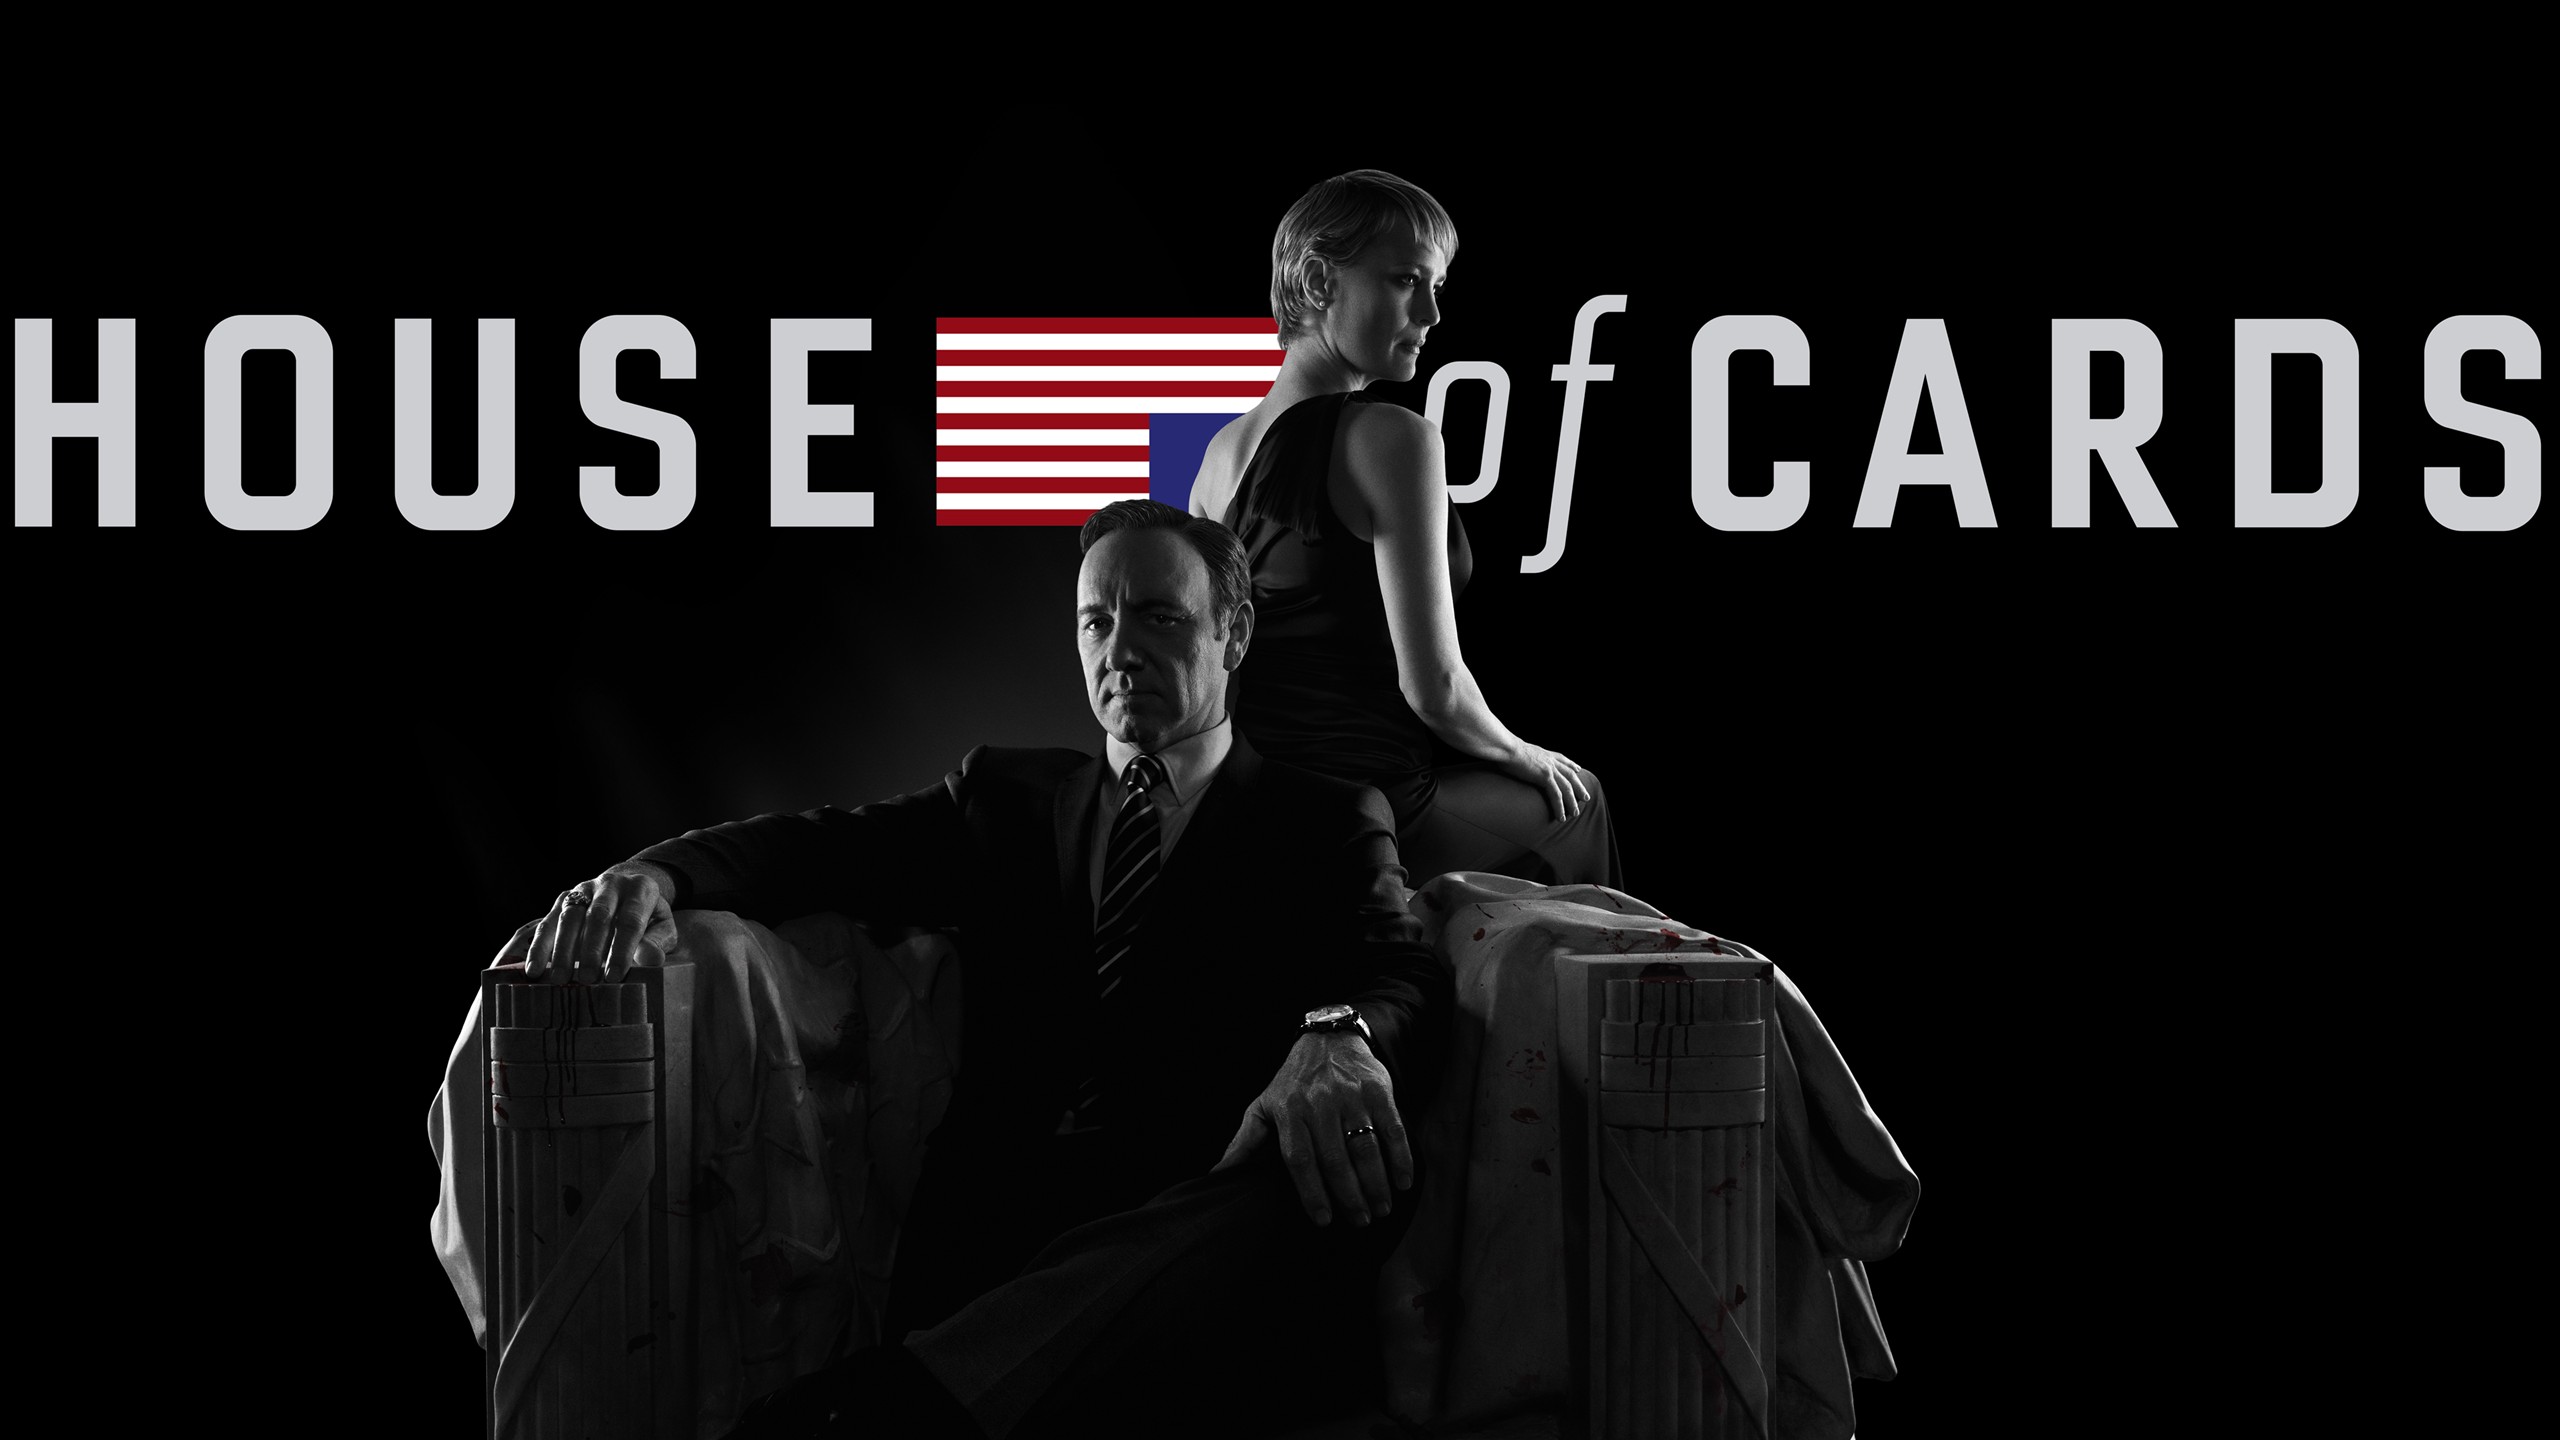 Frank Underwood, Kevin Spacey, Robin Wright, Claire Underwood, Sitting, Couple, House of Cards, American flag, Black background, TV Wallpaper